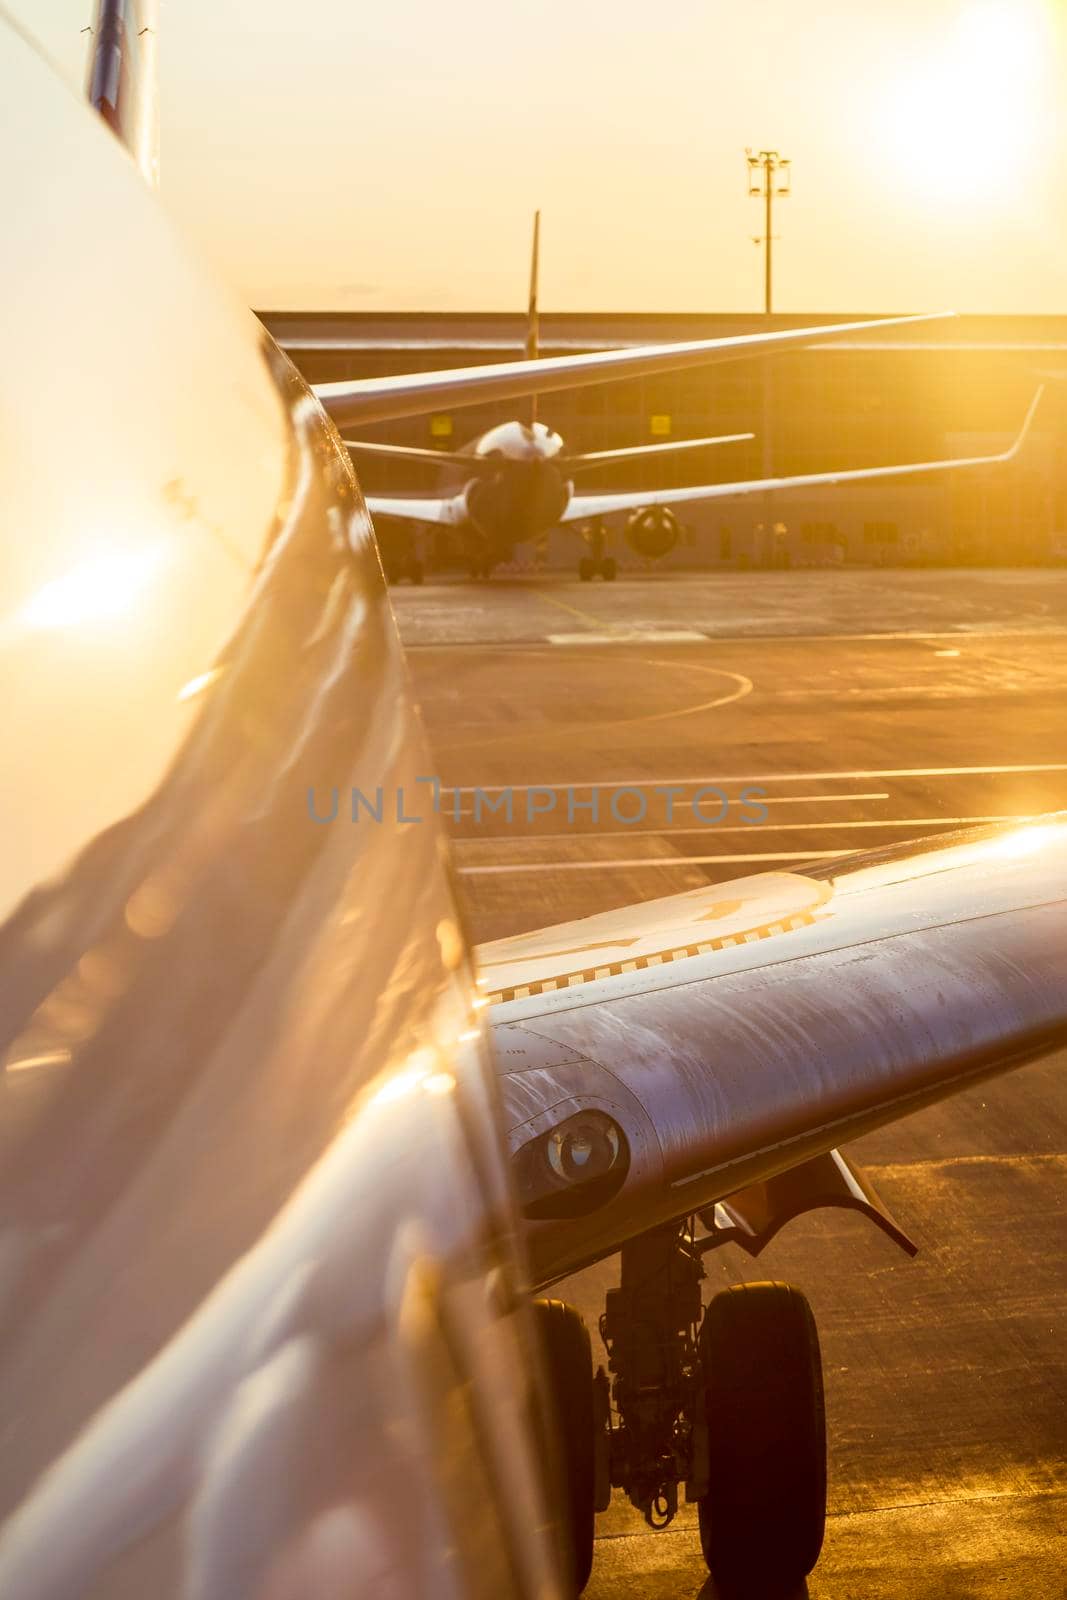 Close-up view of the plane on the runway, airport at sunset